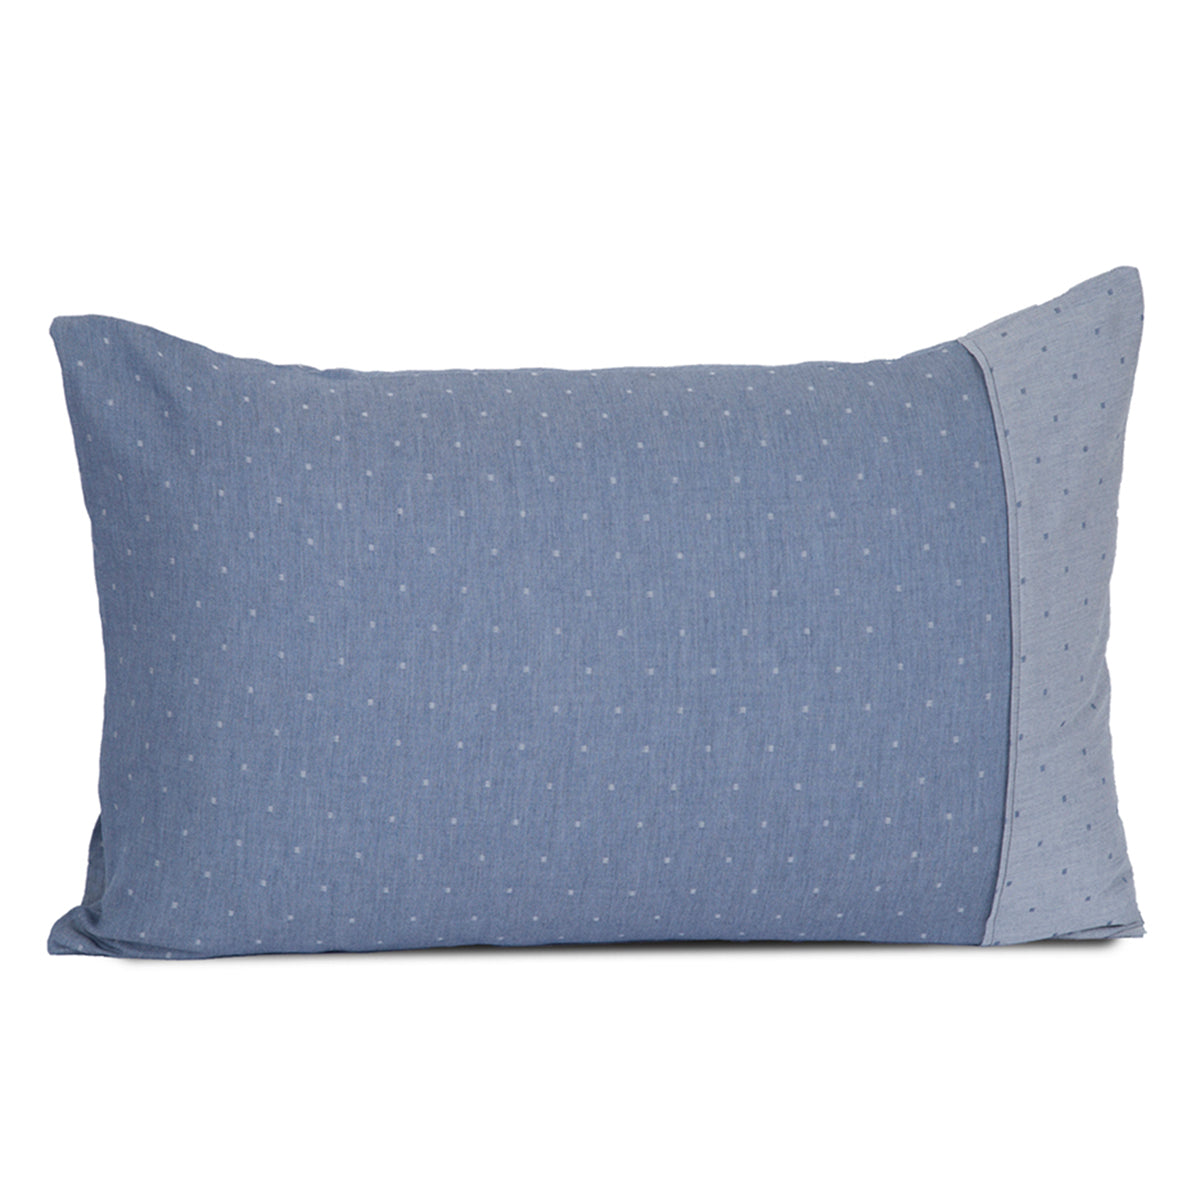 Muted Dot Made With Egyptian Cotton Woven 2PC Pillow Case Set